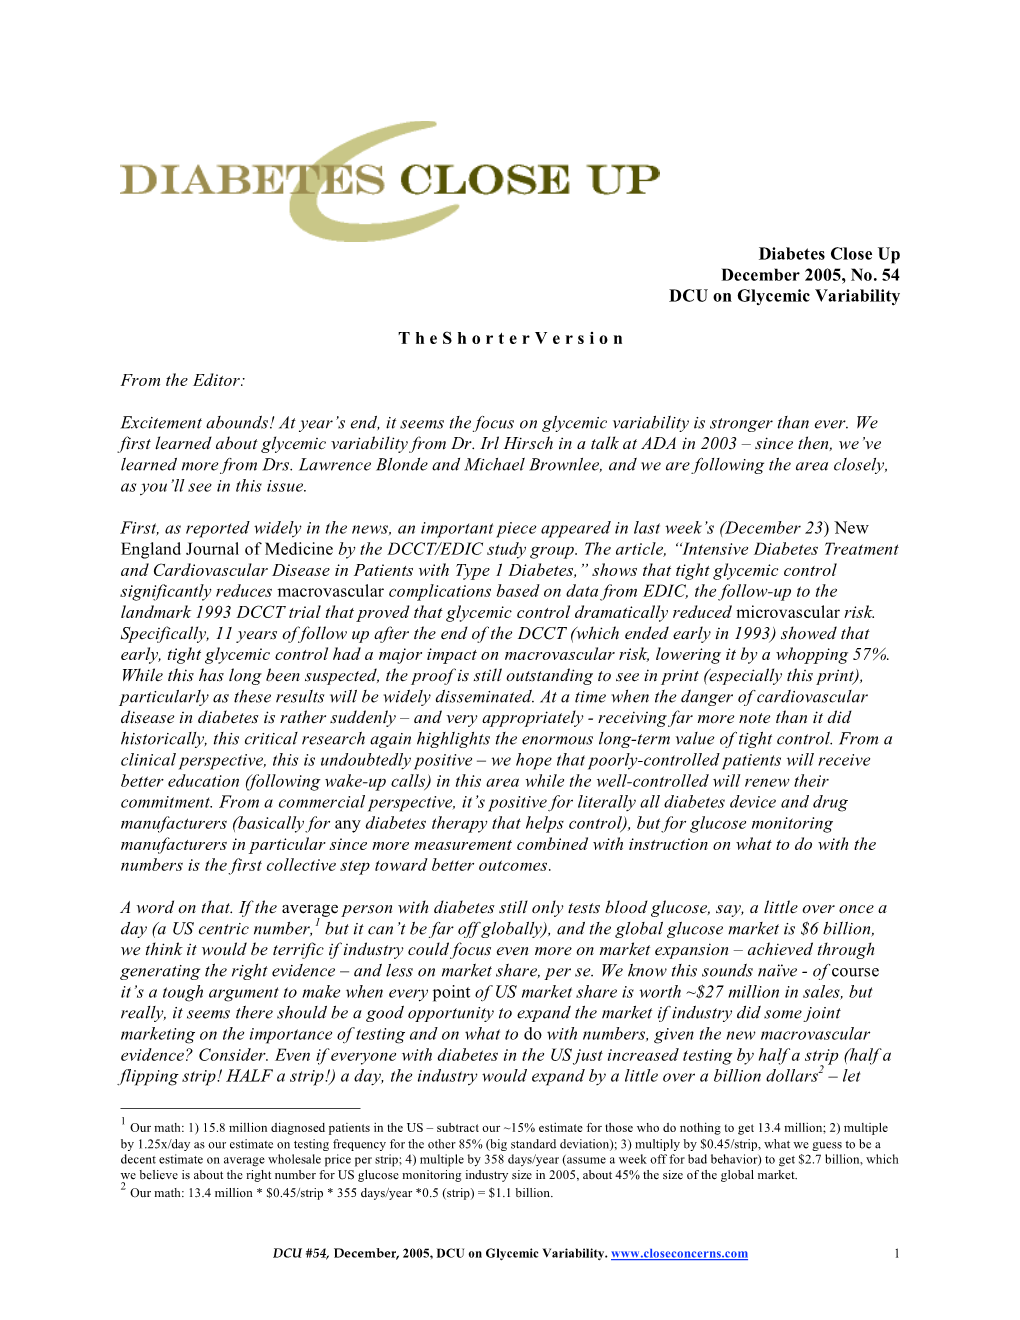 Diabetes Close up December 2005, No. 54 DCU on Glycemic Variability